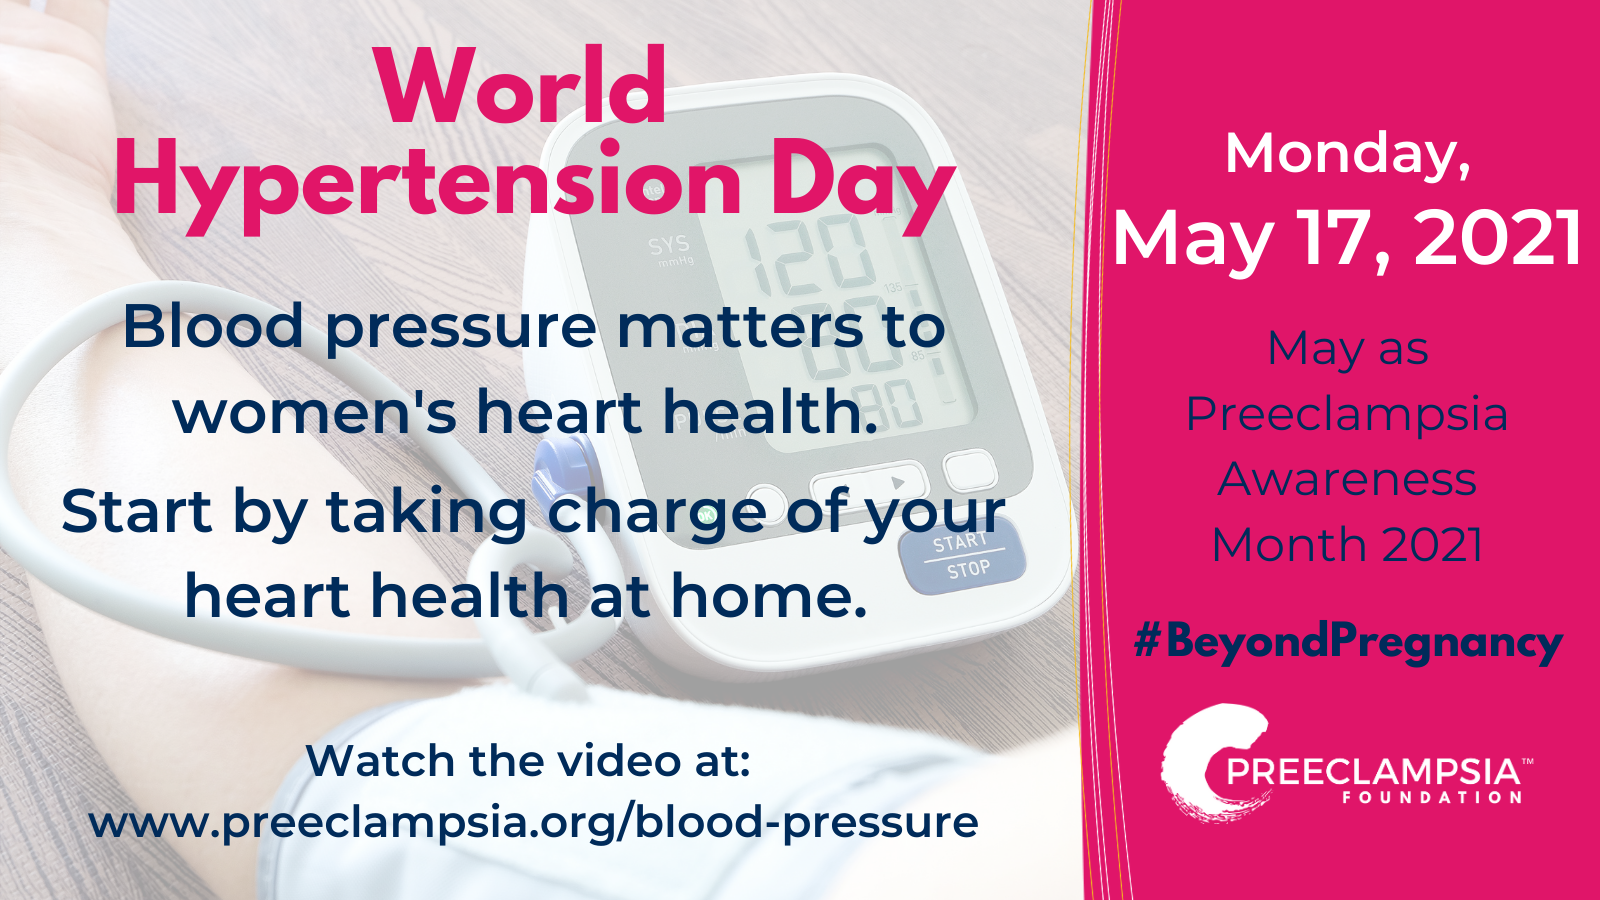 World Hypertension Day.png (1.31 MB)